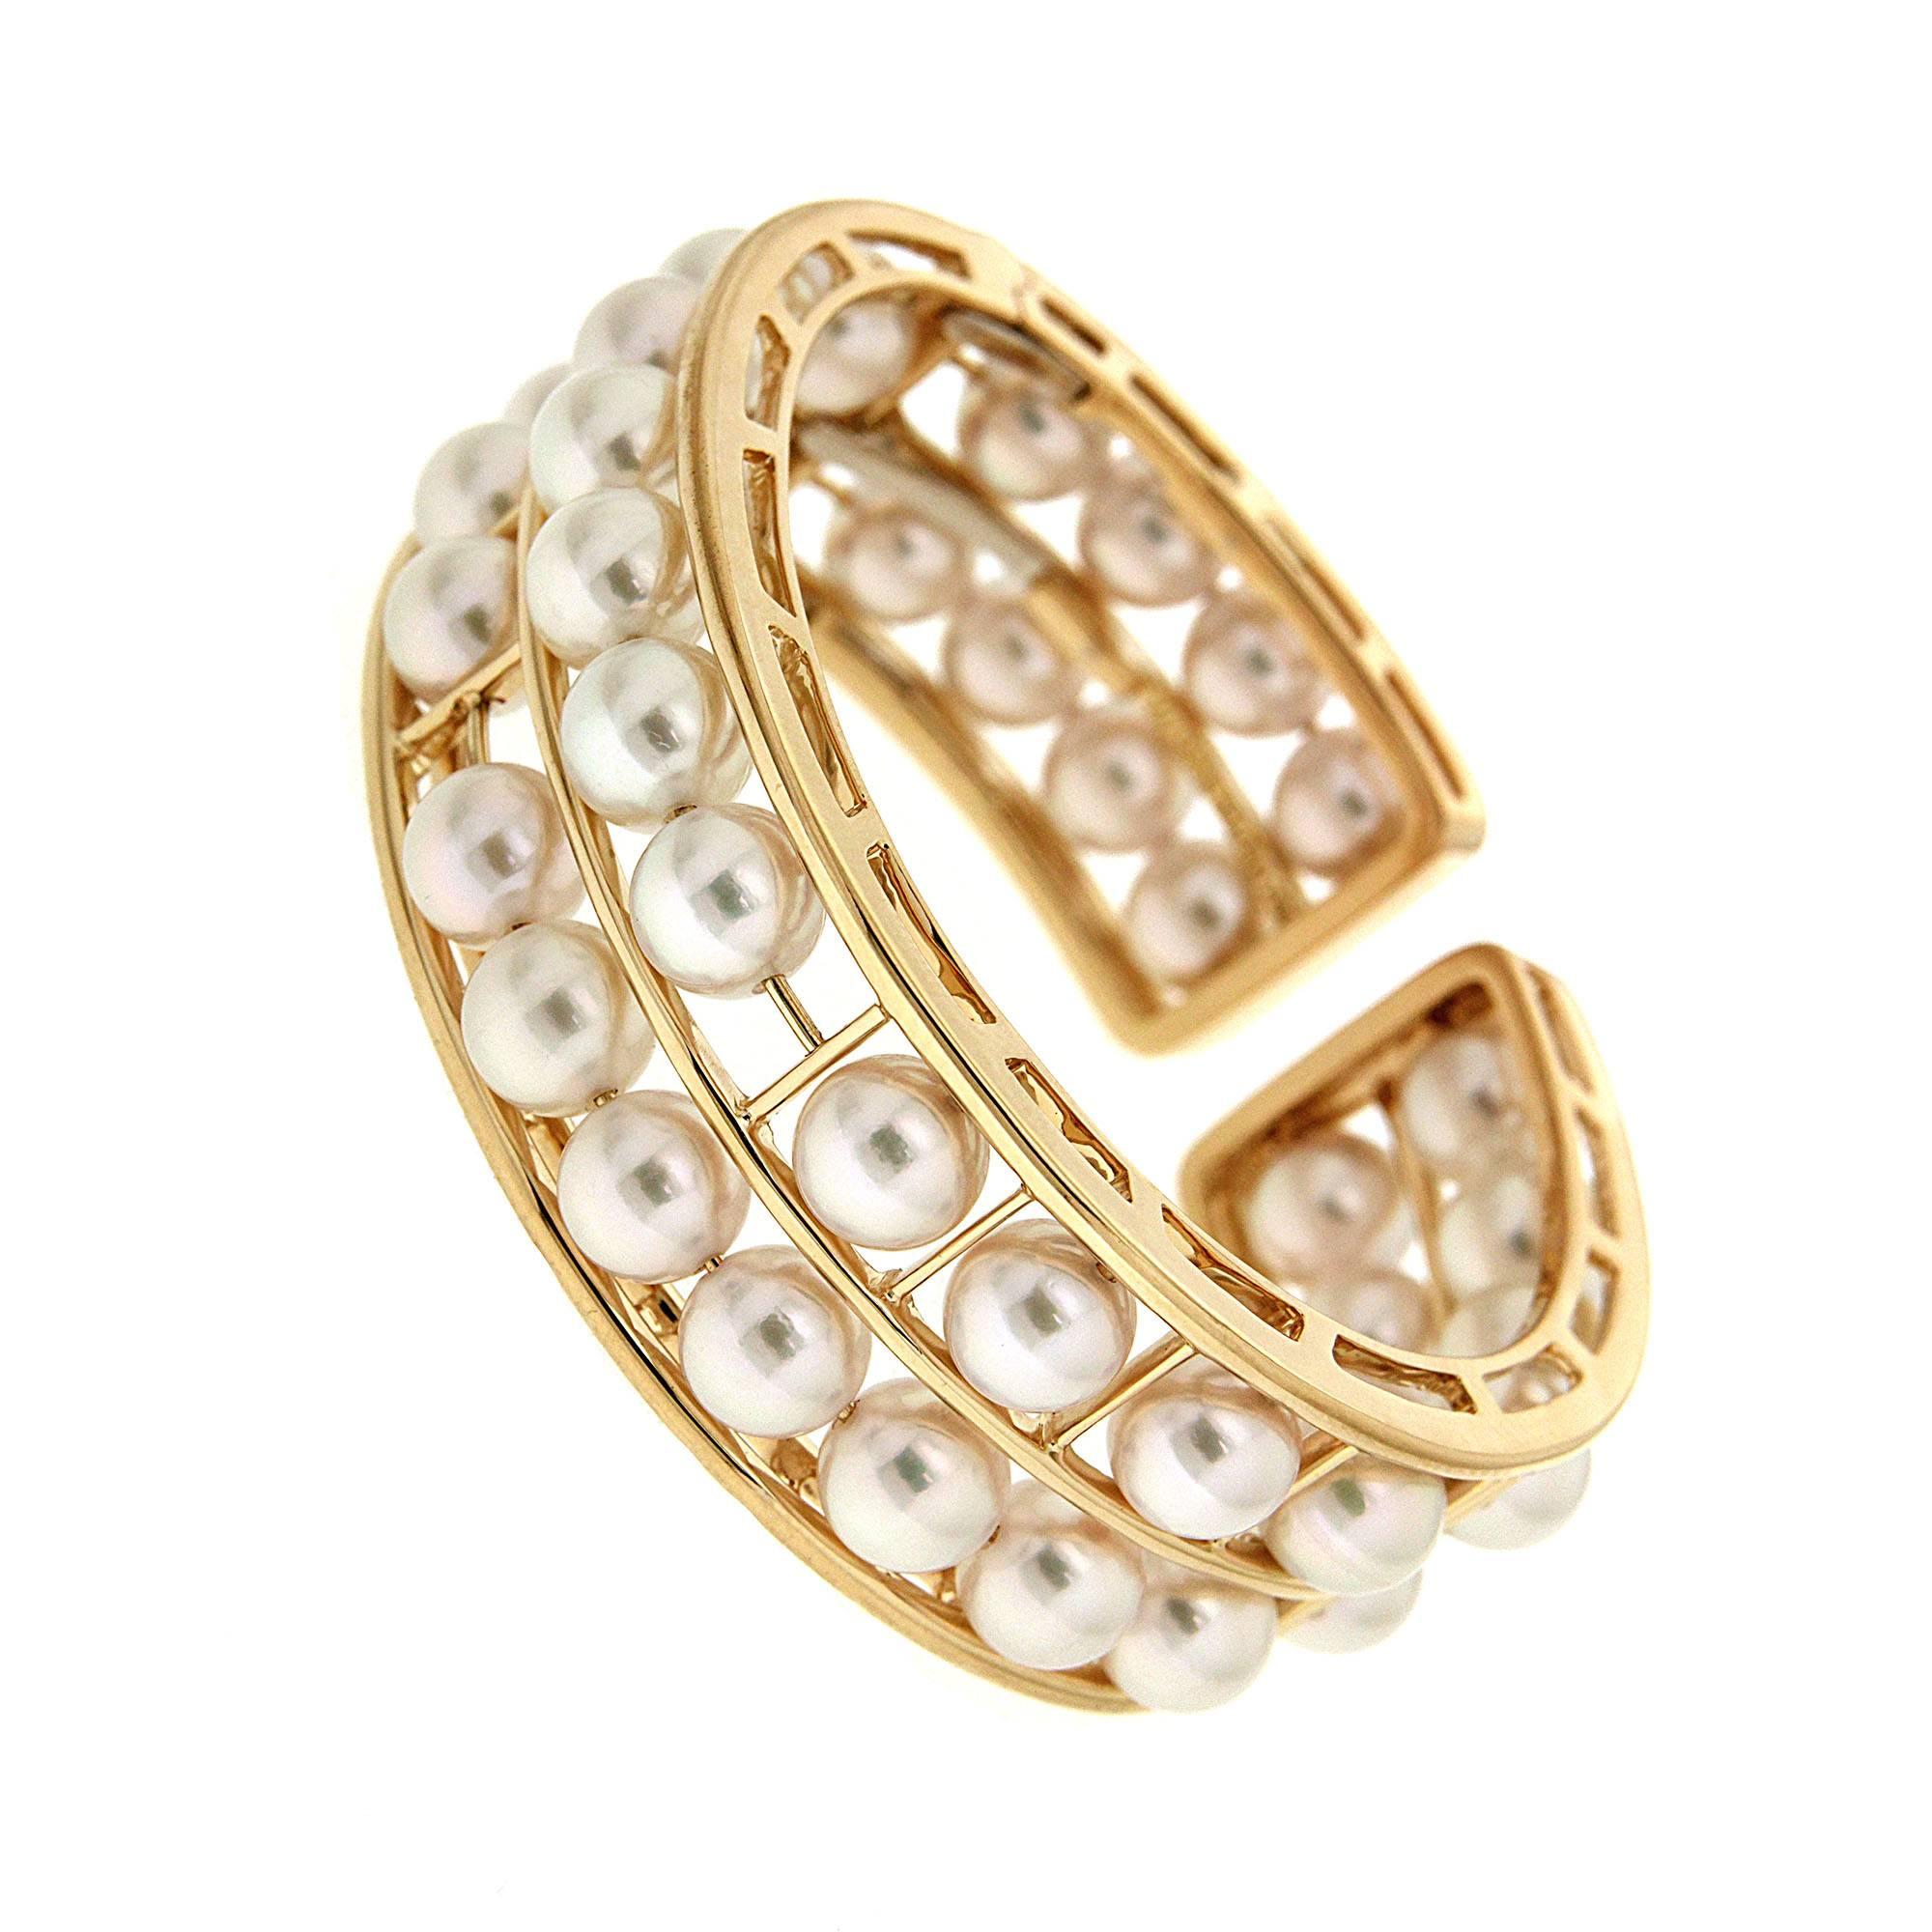 This cuff bracelet created by Valentin Magro is filled with pearls. The frame is 18k yellow gold divided into two rows. Between them shine round white Akoya pearls. At first glance, the jewels seem to float in place. Gold wires running through the